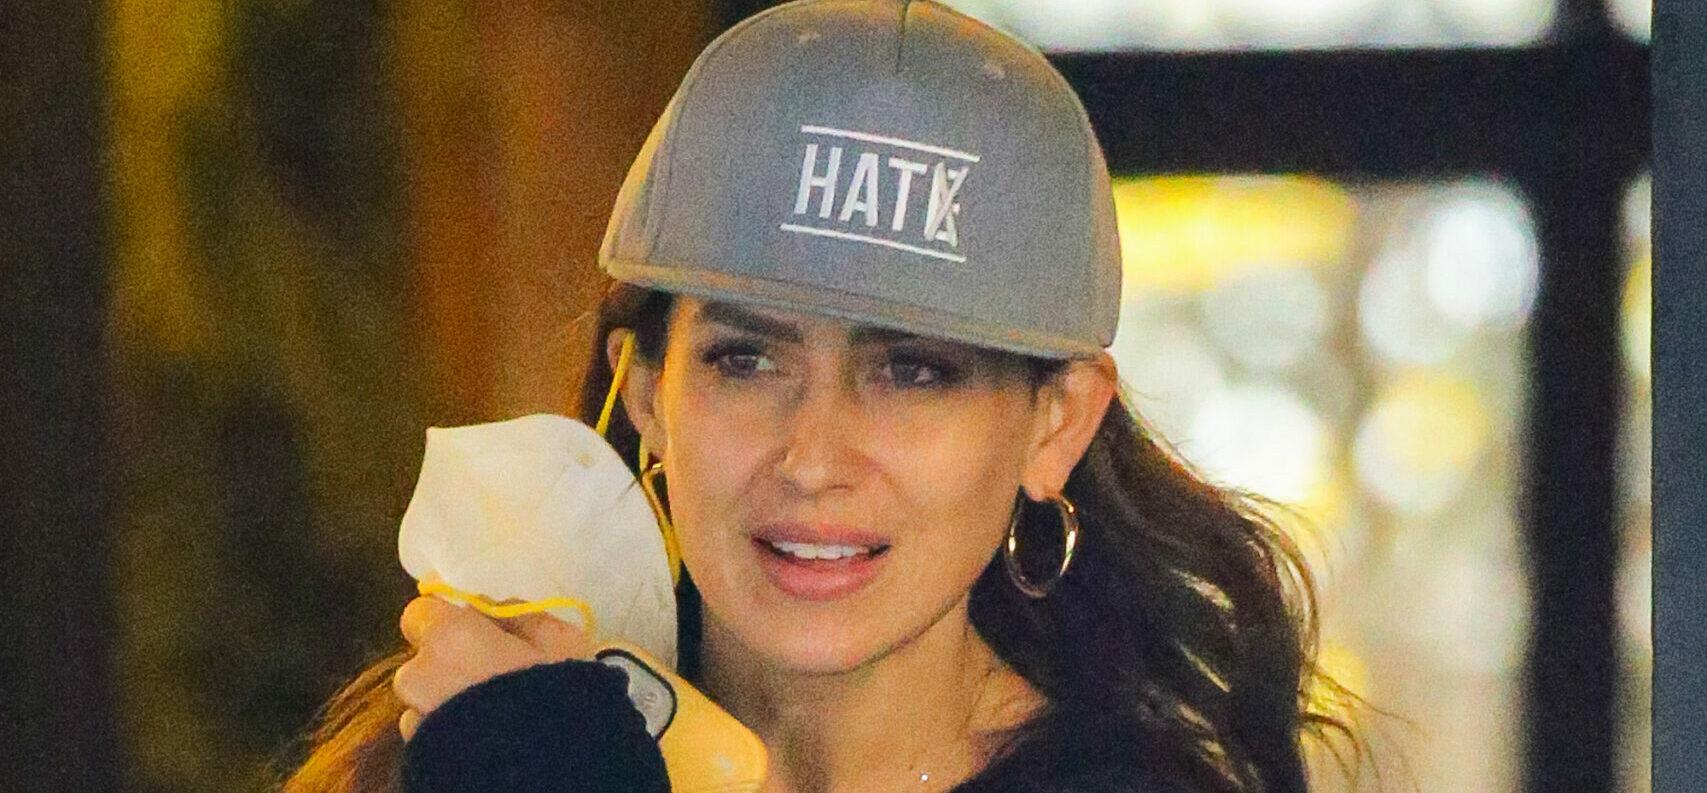 Hilaria Baldwin was spotted wearing a hat leaving apartment Building in NYC